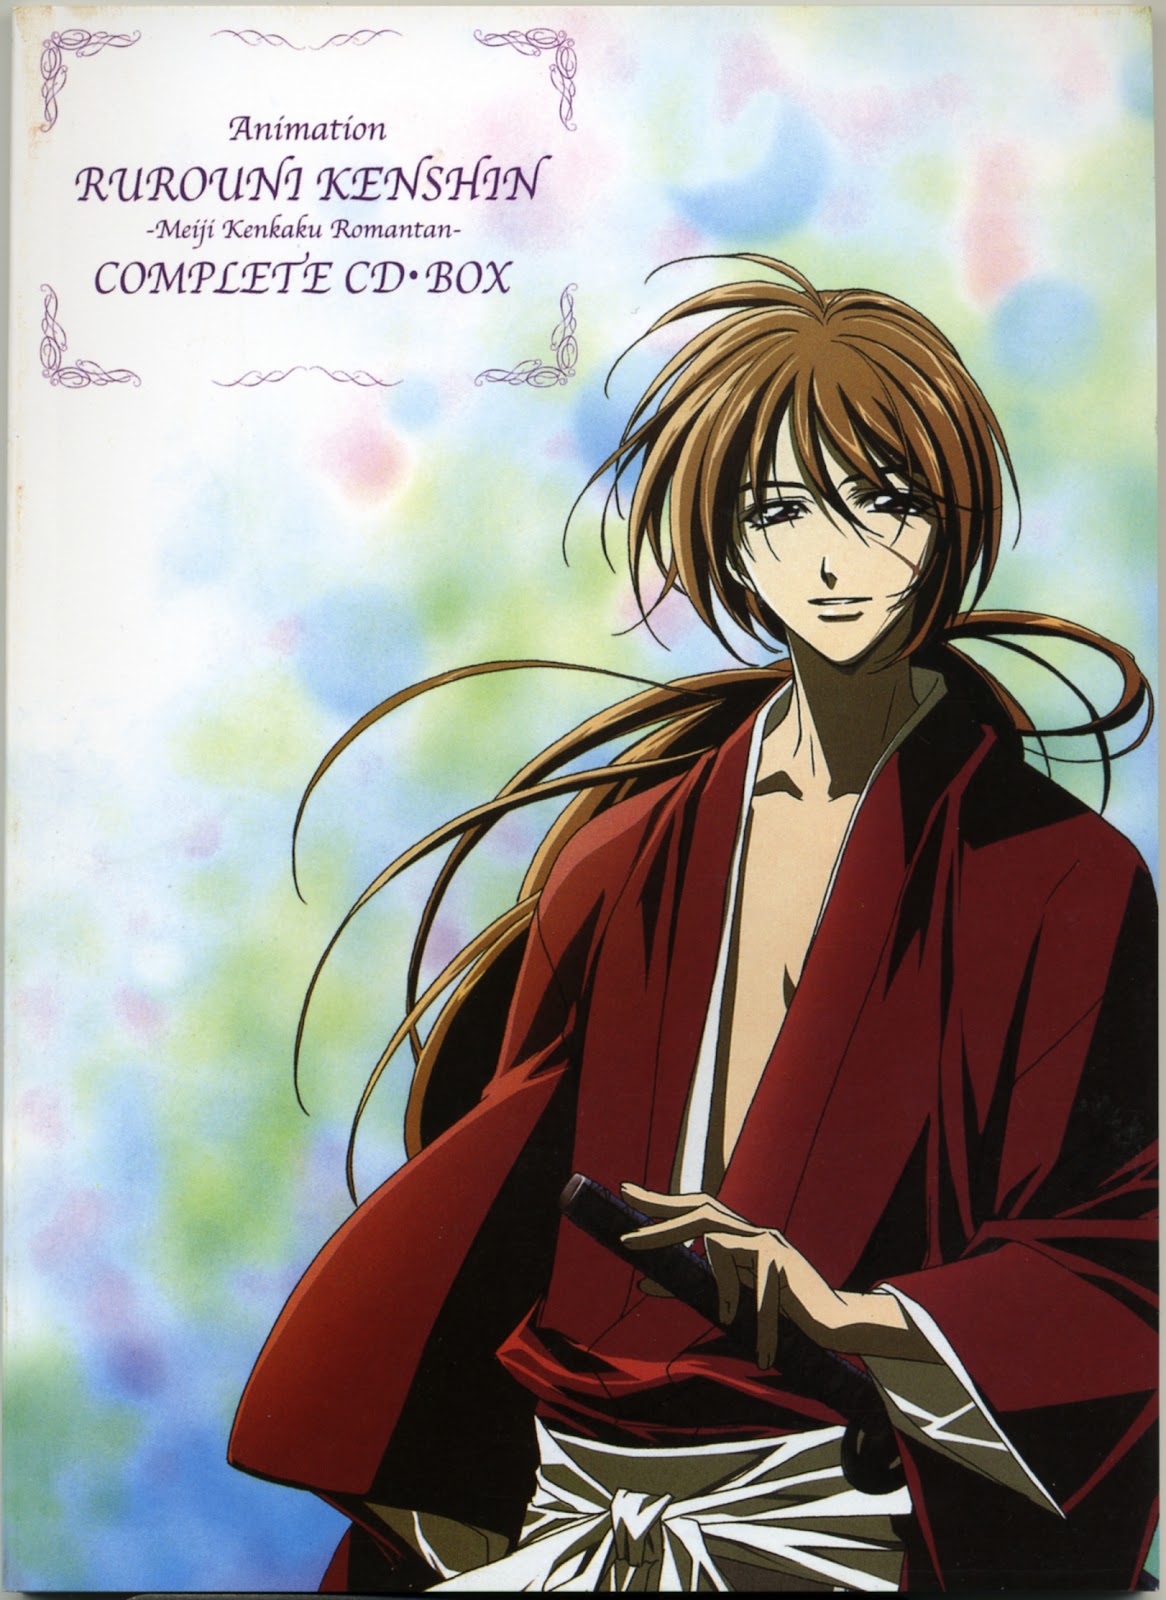 Release “Rurouni Kenshin Complete CD-BOX” by Various Artists - Cover